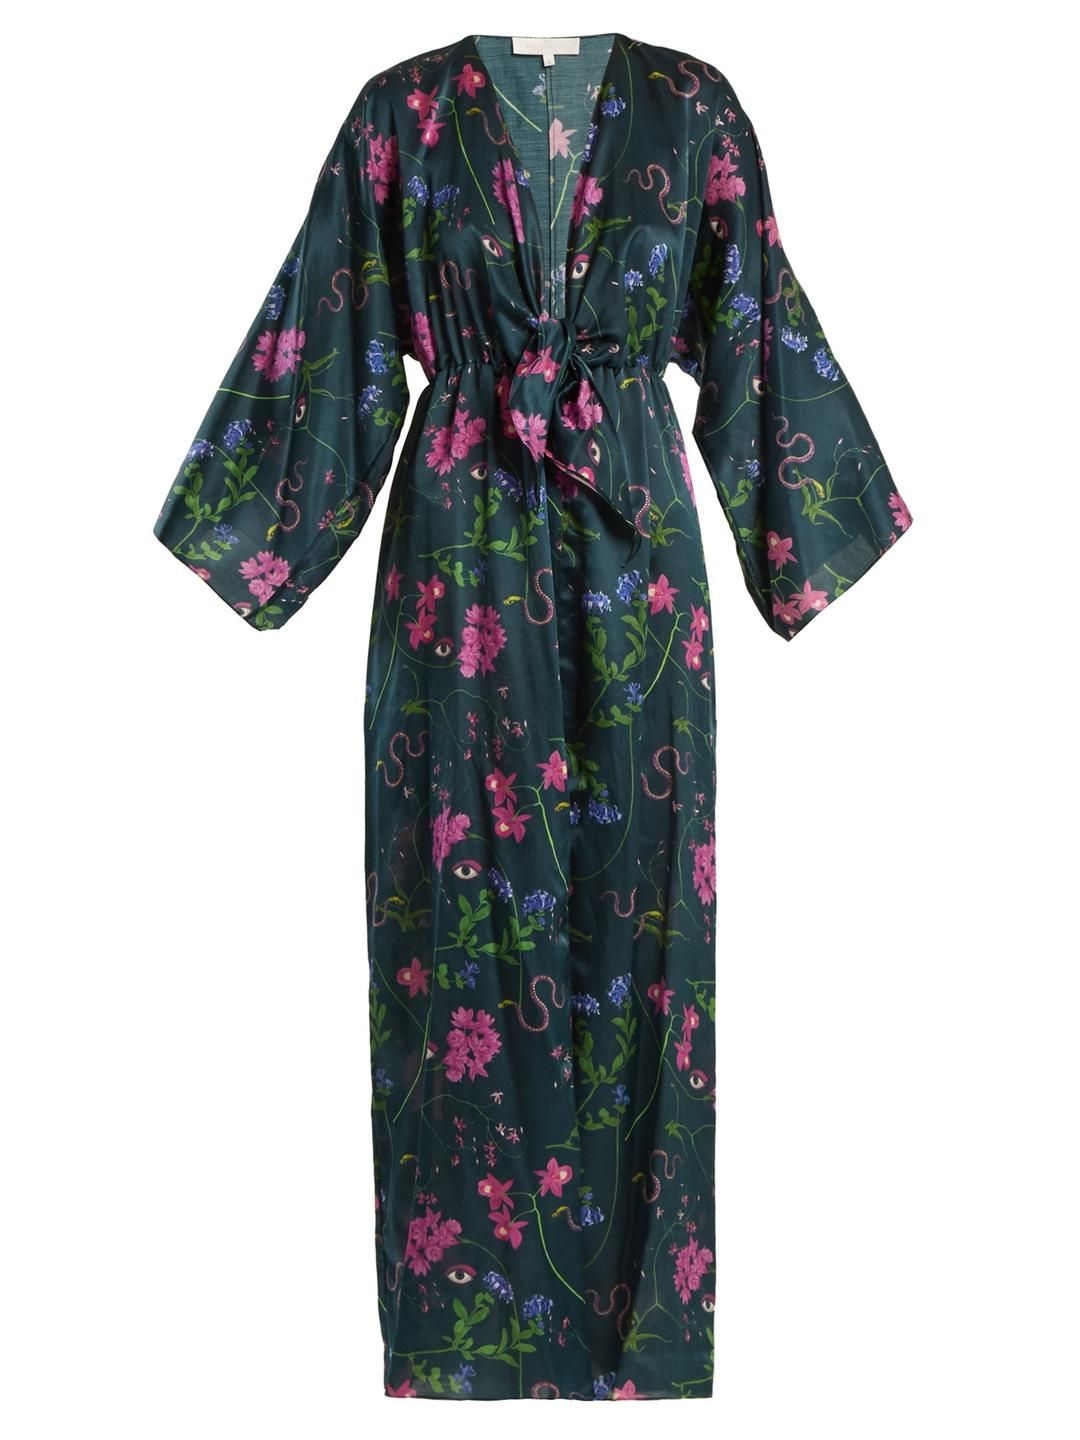 Cute Kimonos That Are Perfect for Spring | Who What Wear